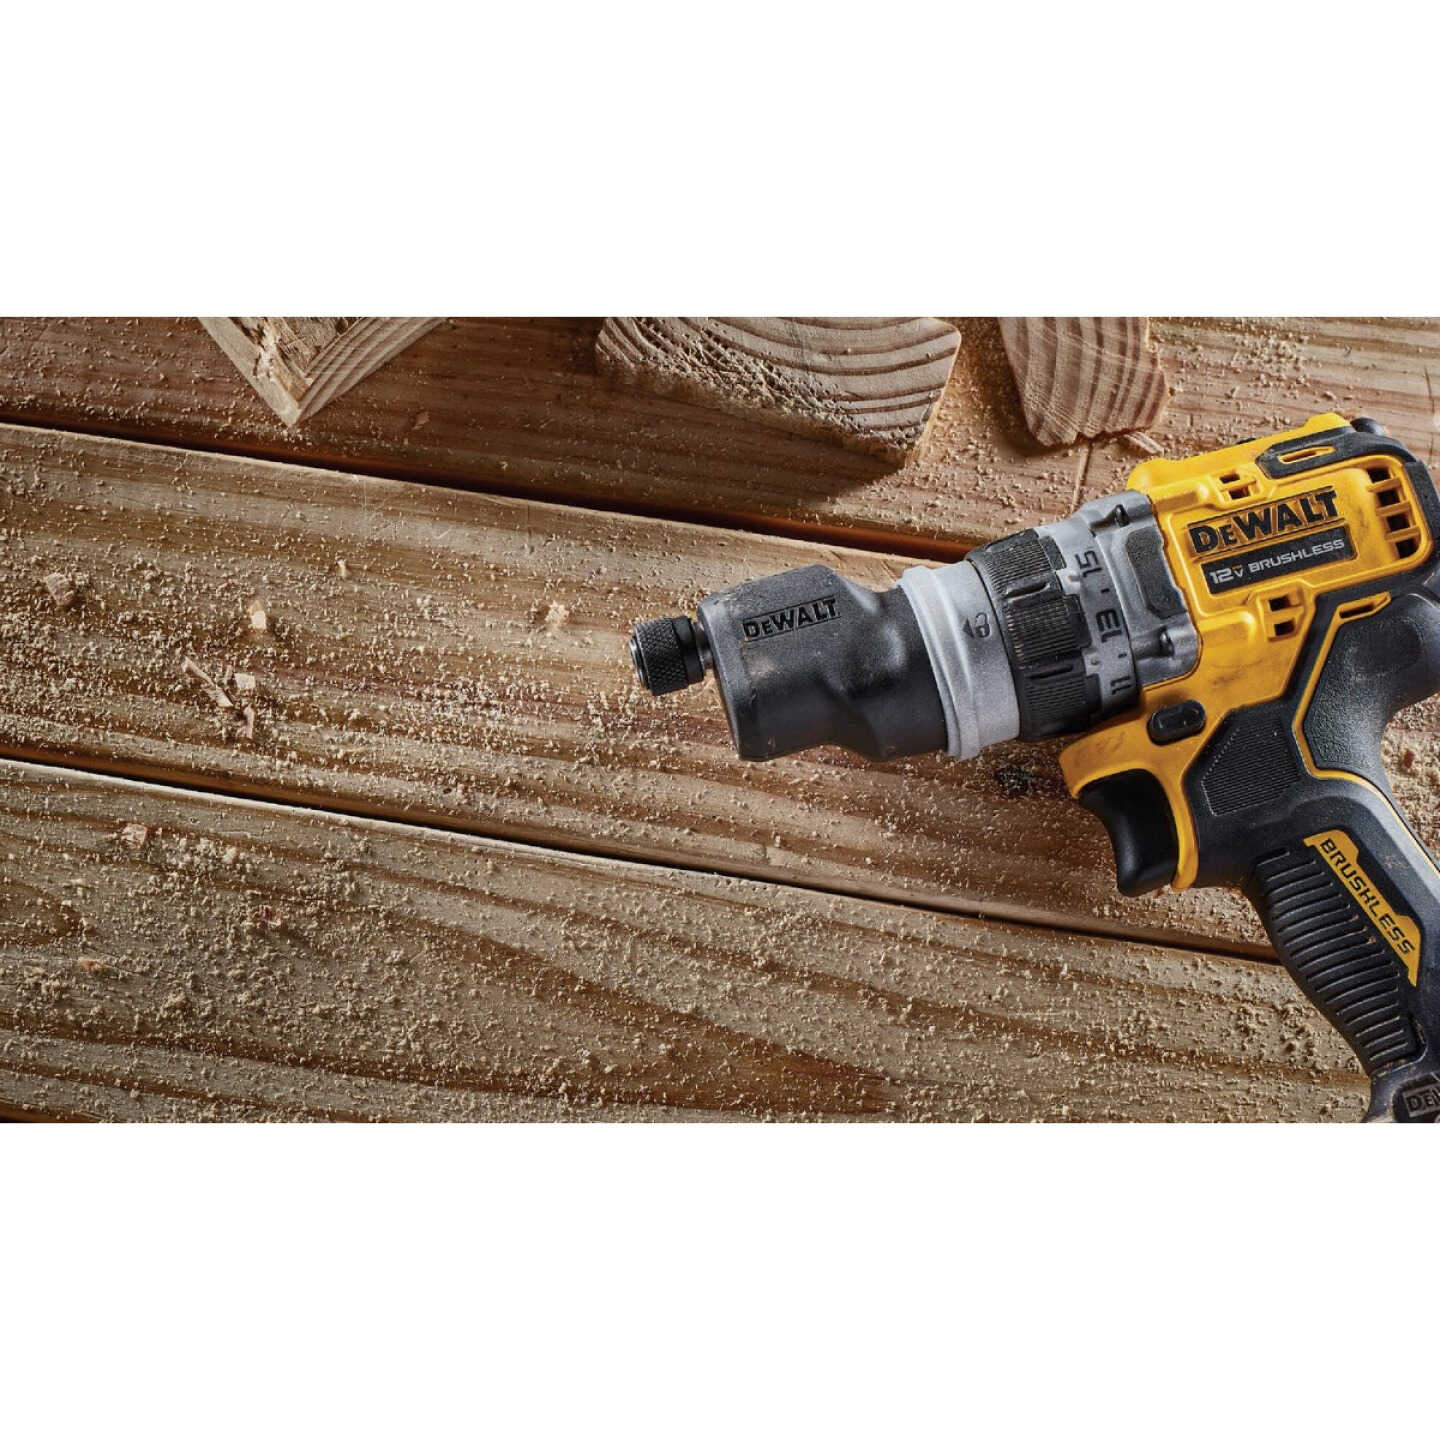 DEWALT XTREME 12V MAX Brushless 3/8 In. 5-In-1 Cordless Drill/Driver Kit  with 2.0 Ah Battery & Charger - Power Townsend Company